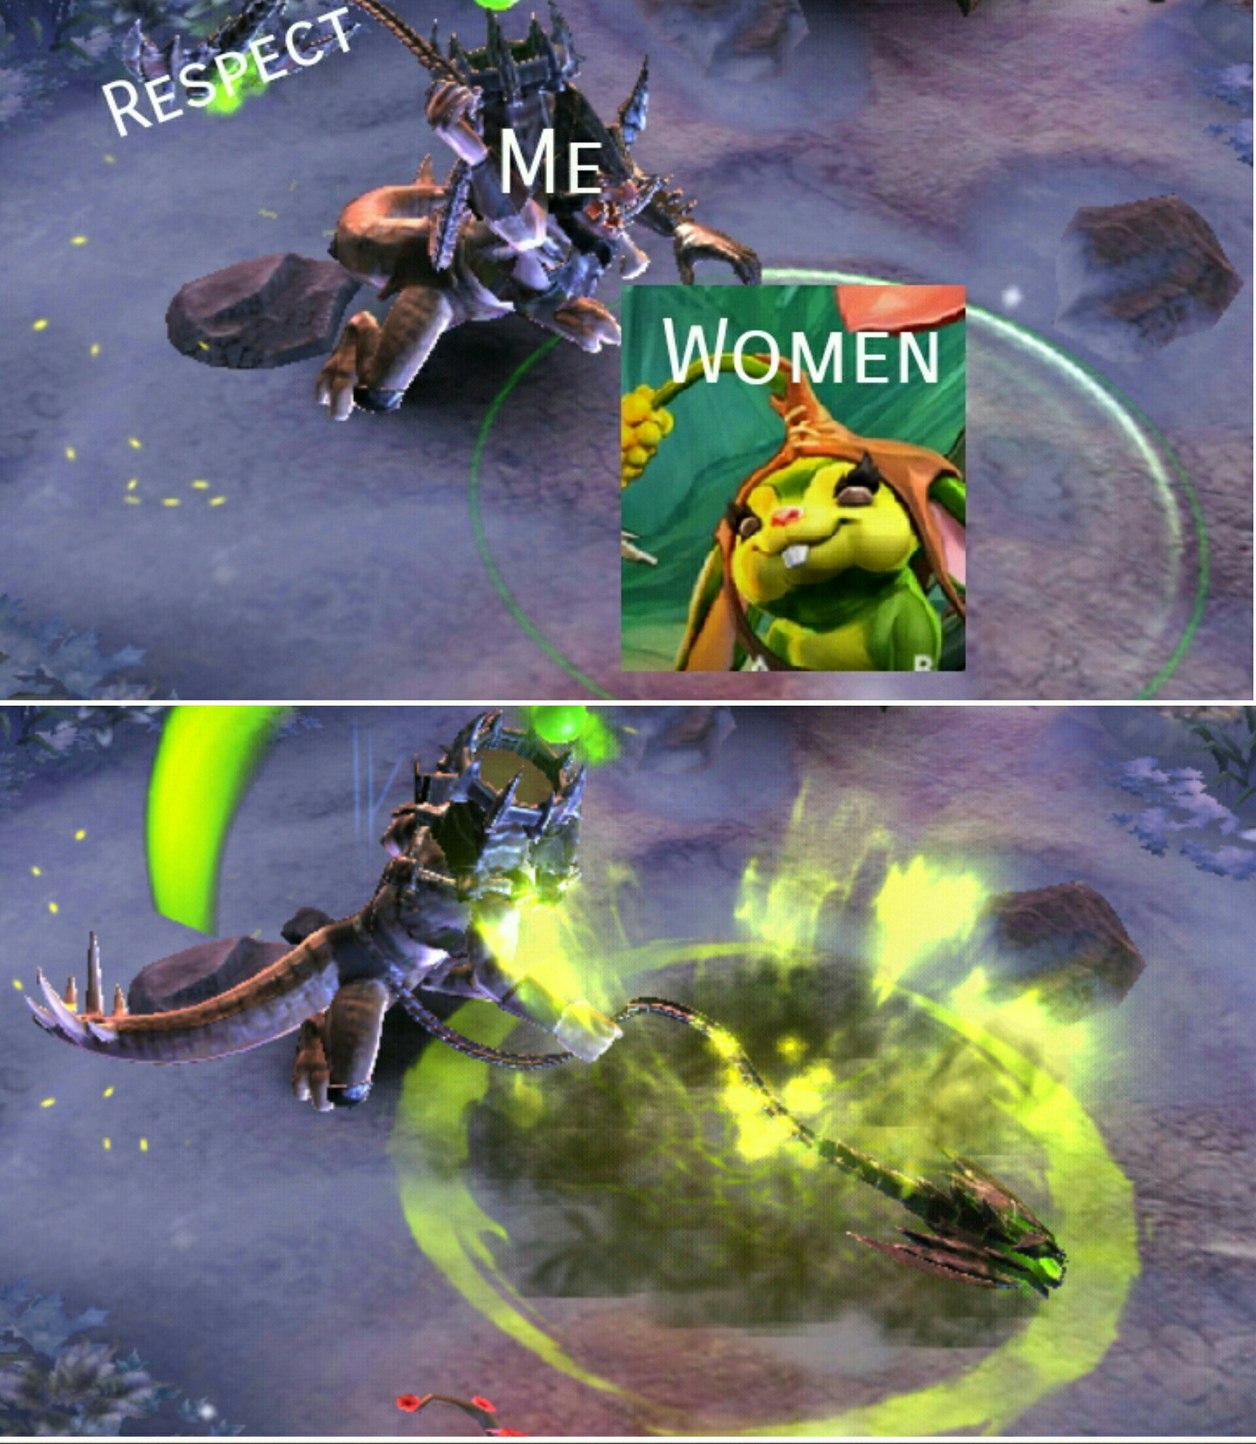 It's from a game I play called Vainglory - meme